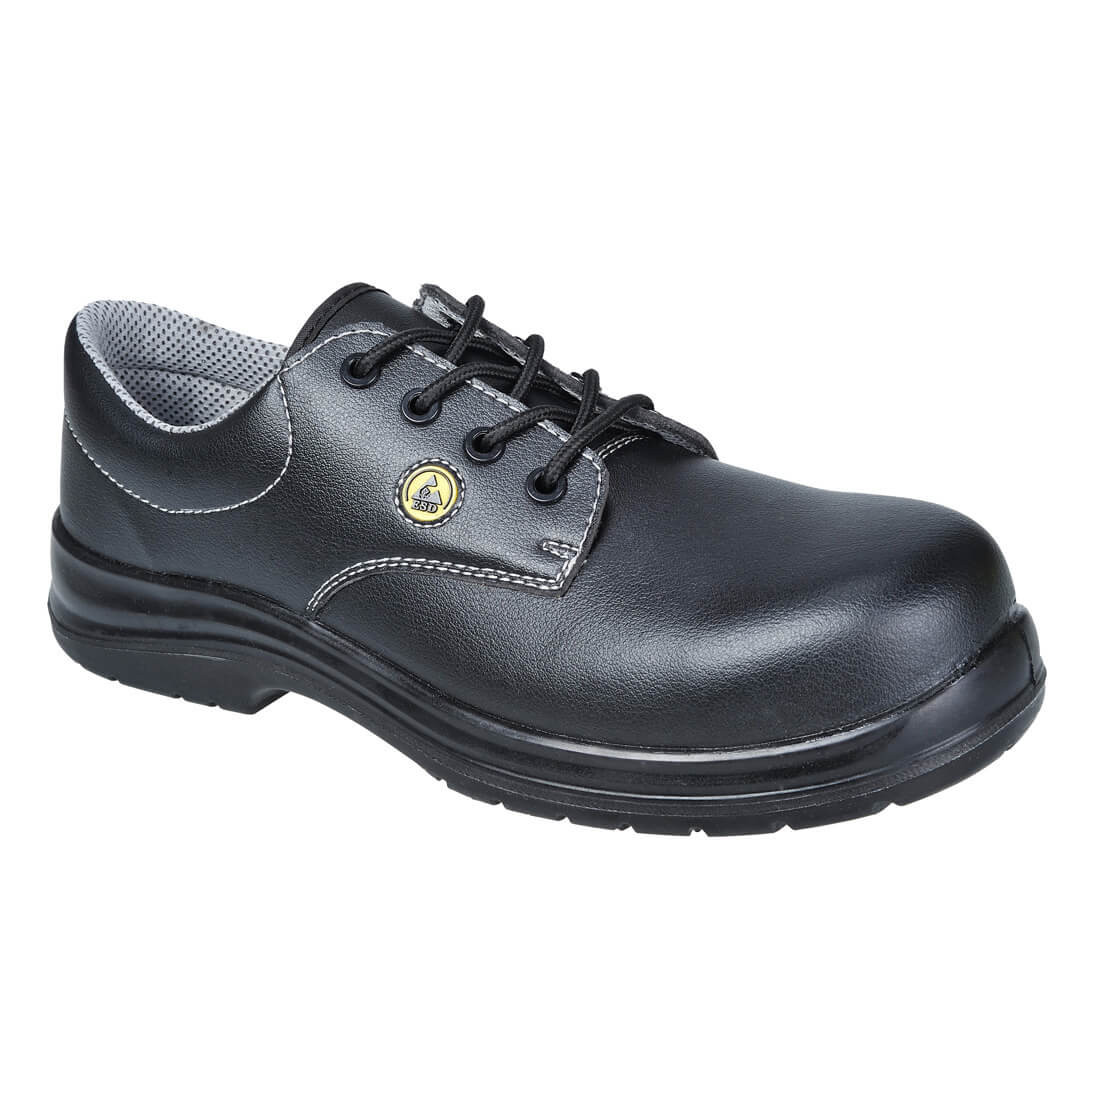 Compositelite™ ESD Laced Safety Shoe S2 - Footwear